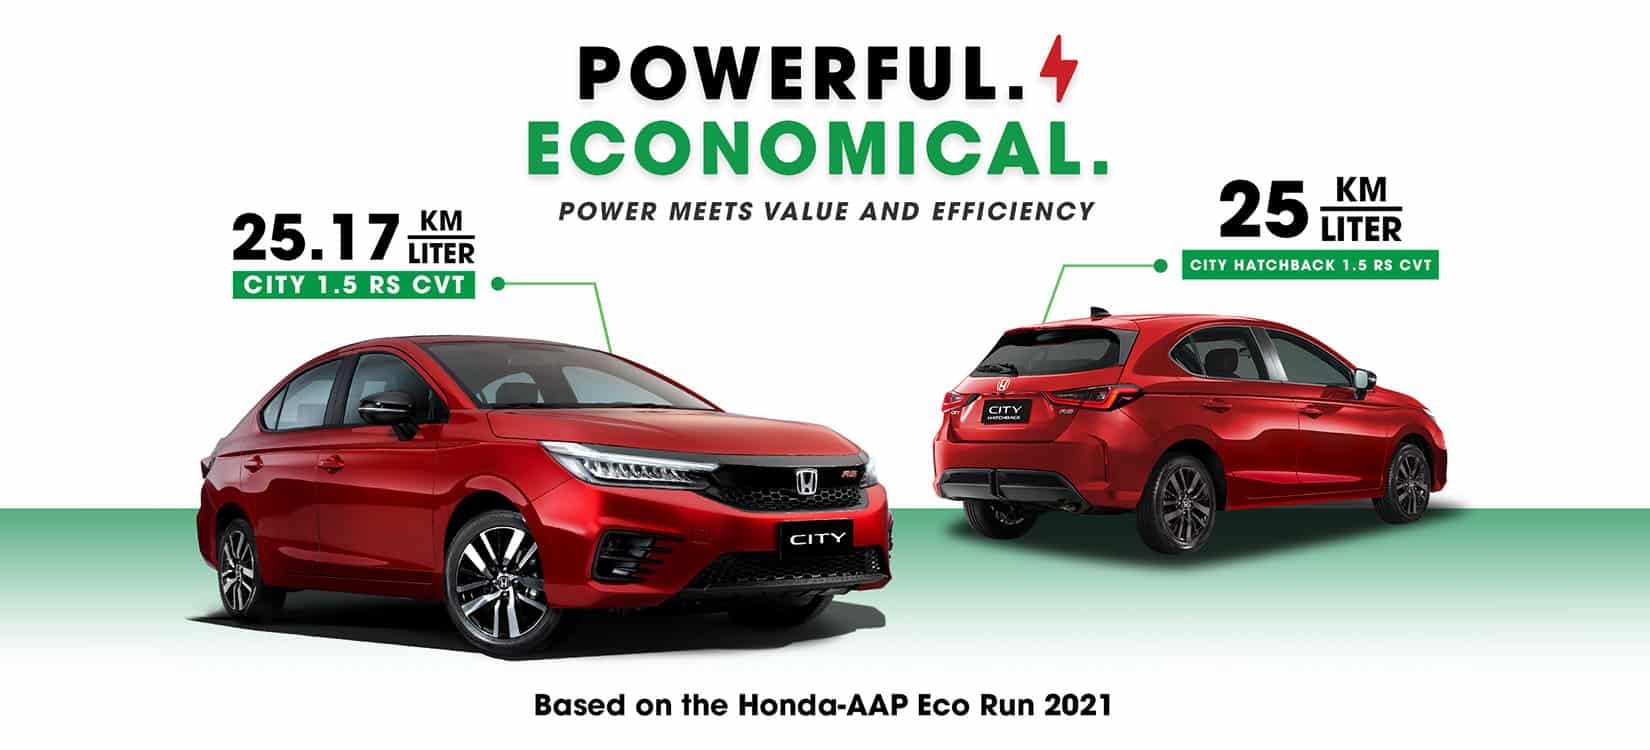 Honda Cars Philippines › Honda releases excellent fuel economy results